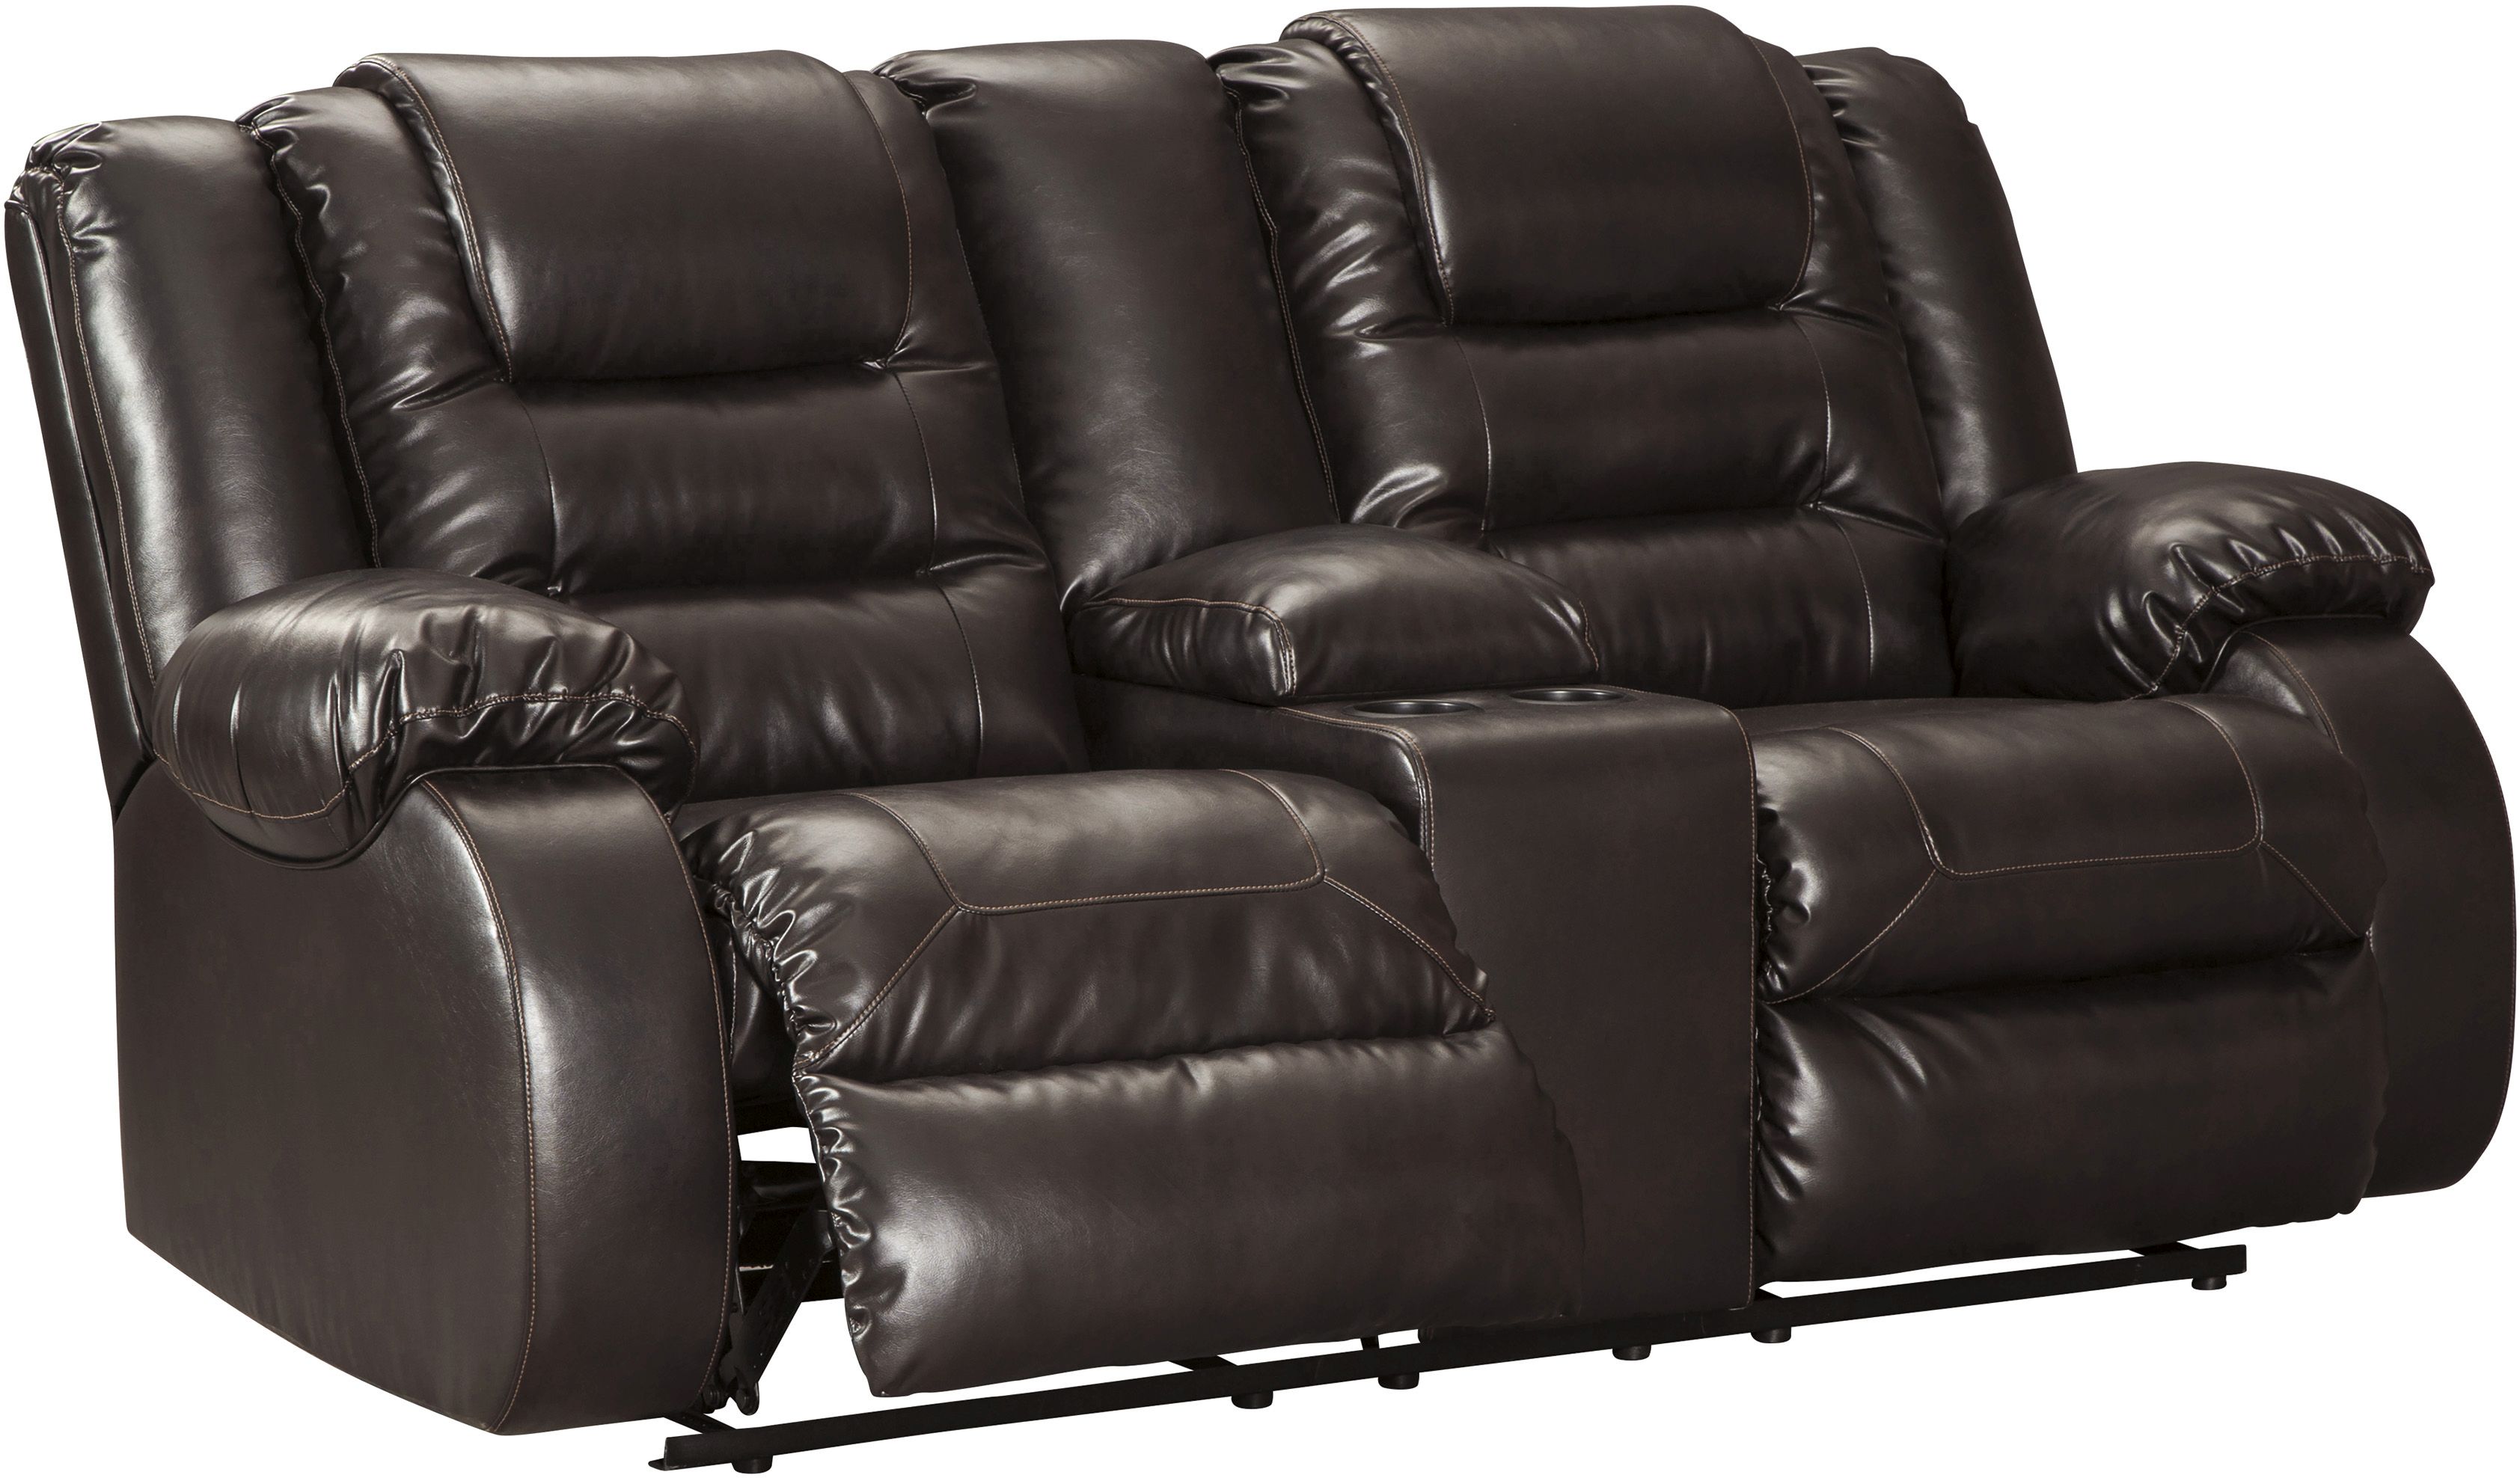 Signature Design by Ashley® Vacherie Chocolate Double Reclining Loveseat with Console